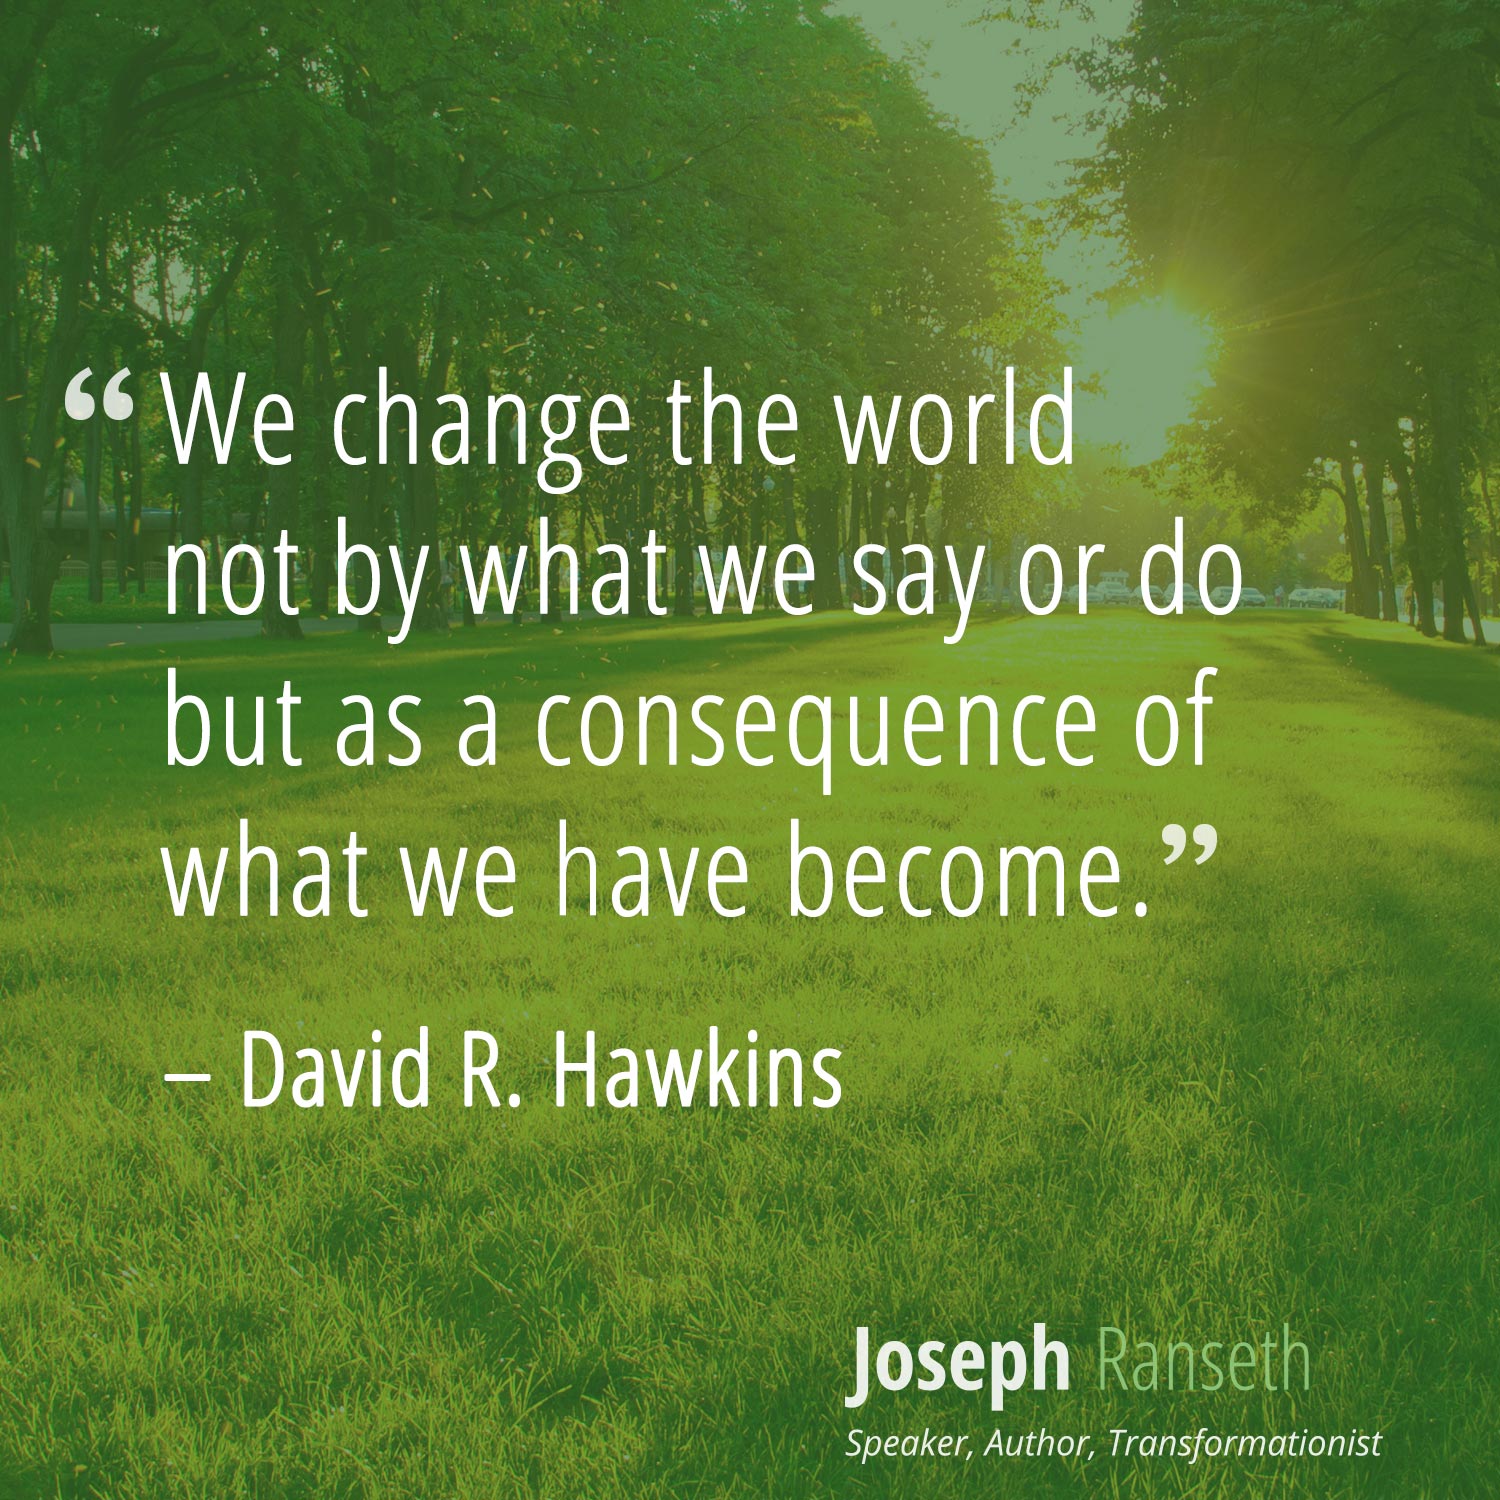 "We change the world not by what we say or do but as a consequence of what we have become." - David R. Hawkins